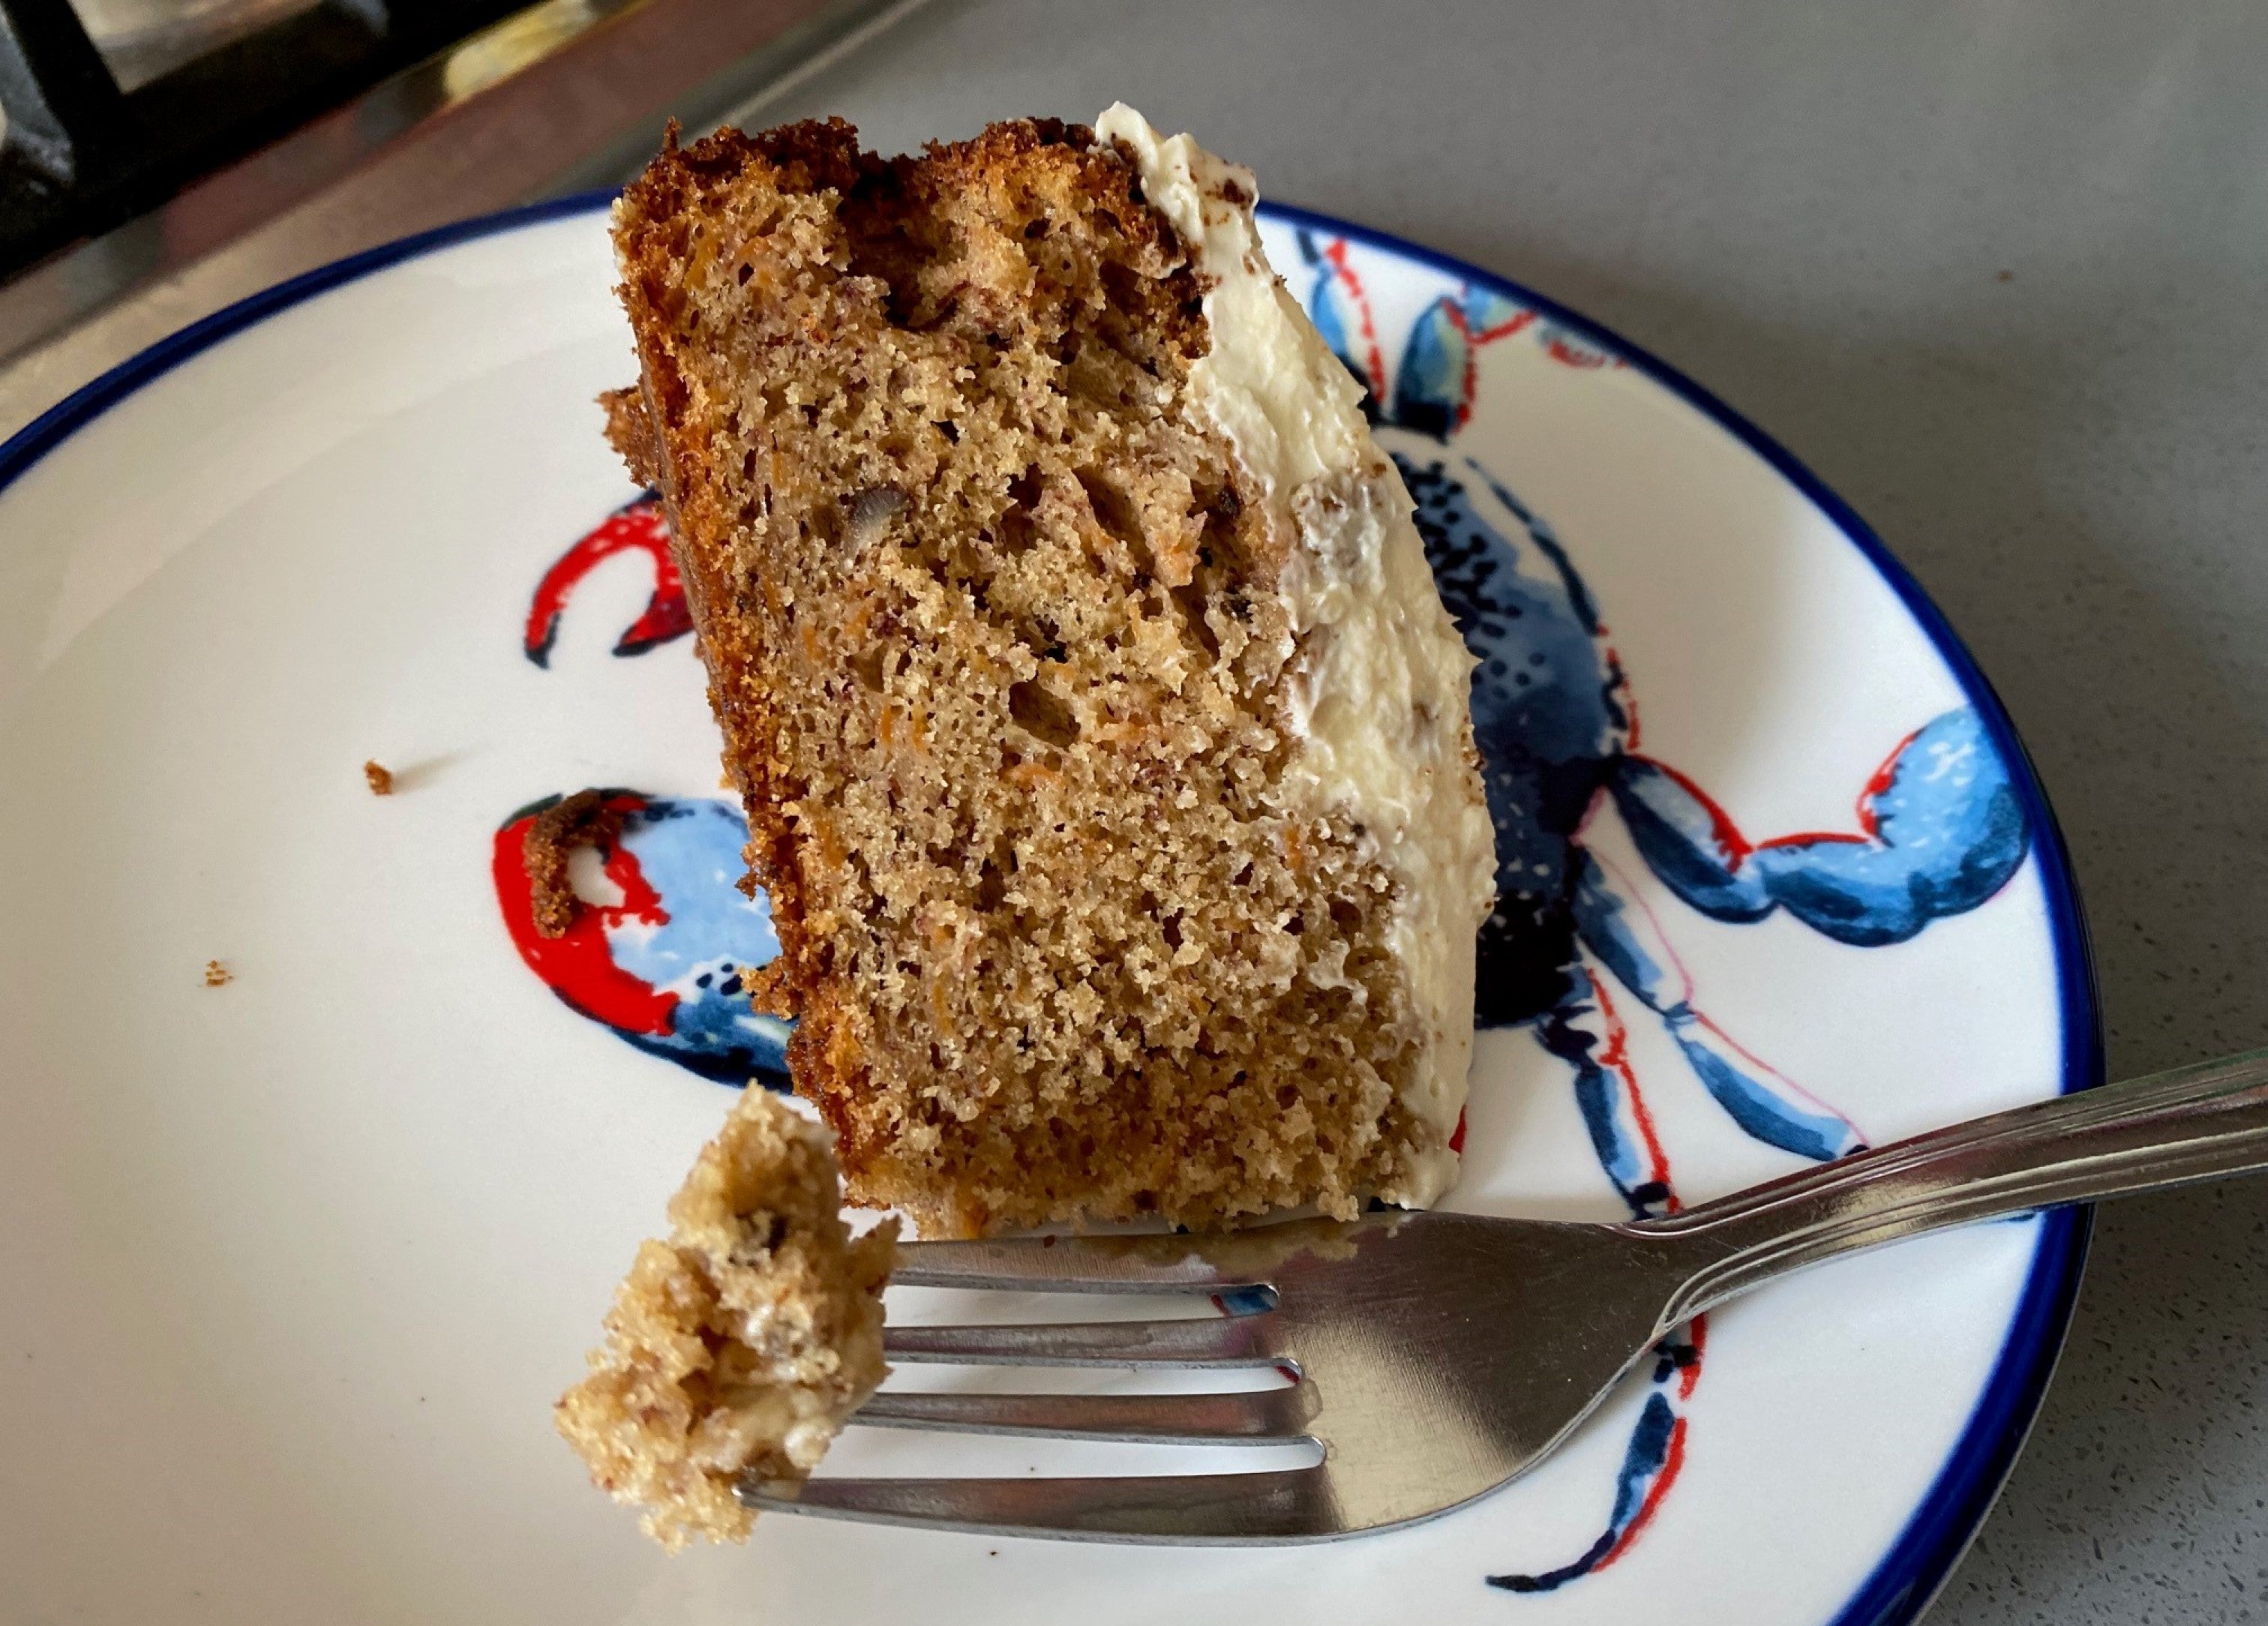 Slice of Mary Berry's carrot cake on a plate with a forkful of cake resting nearby